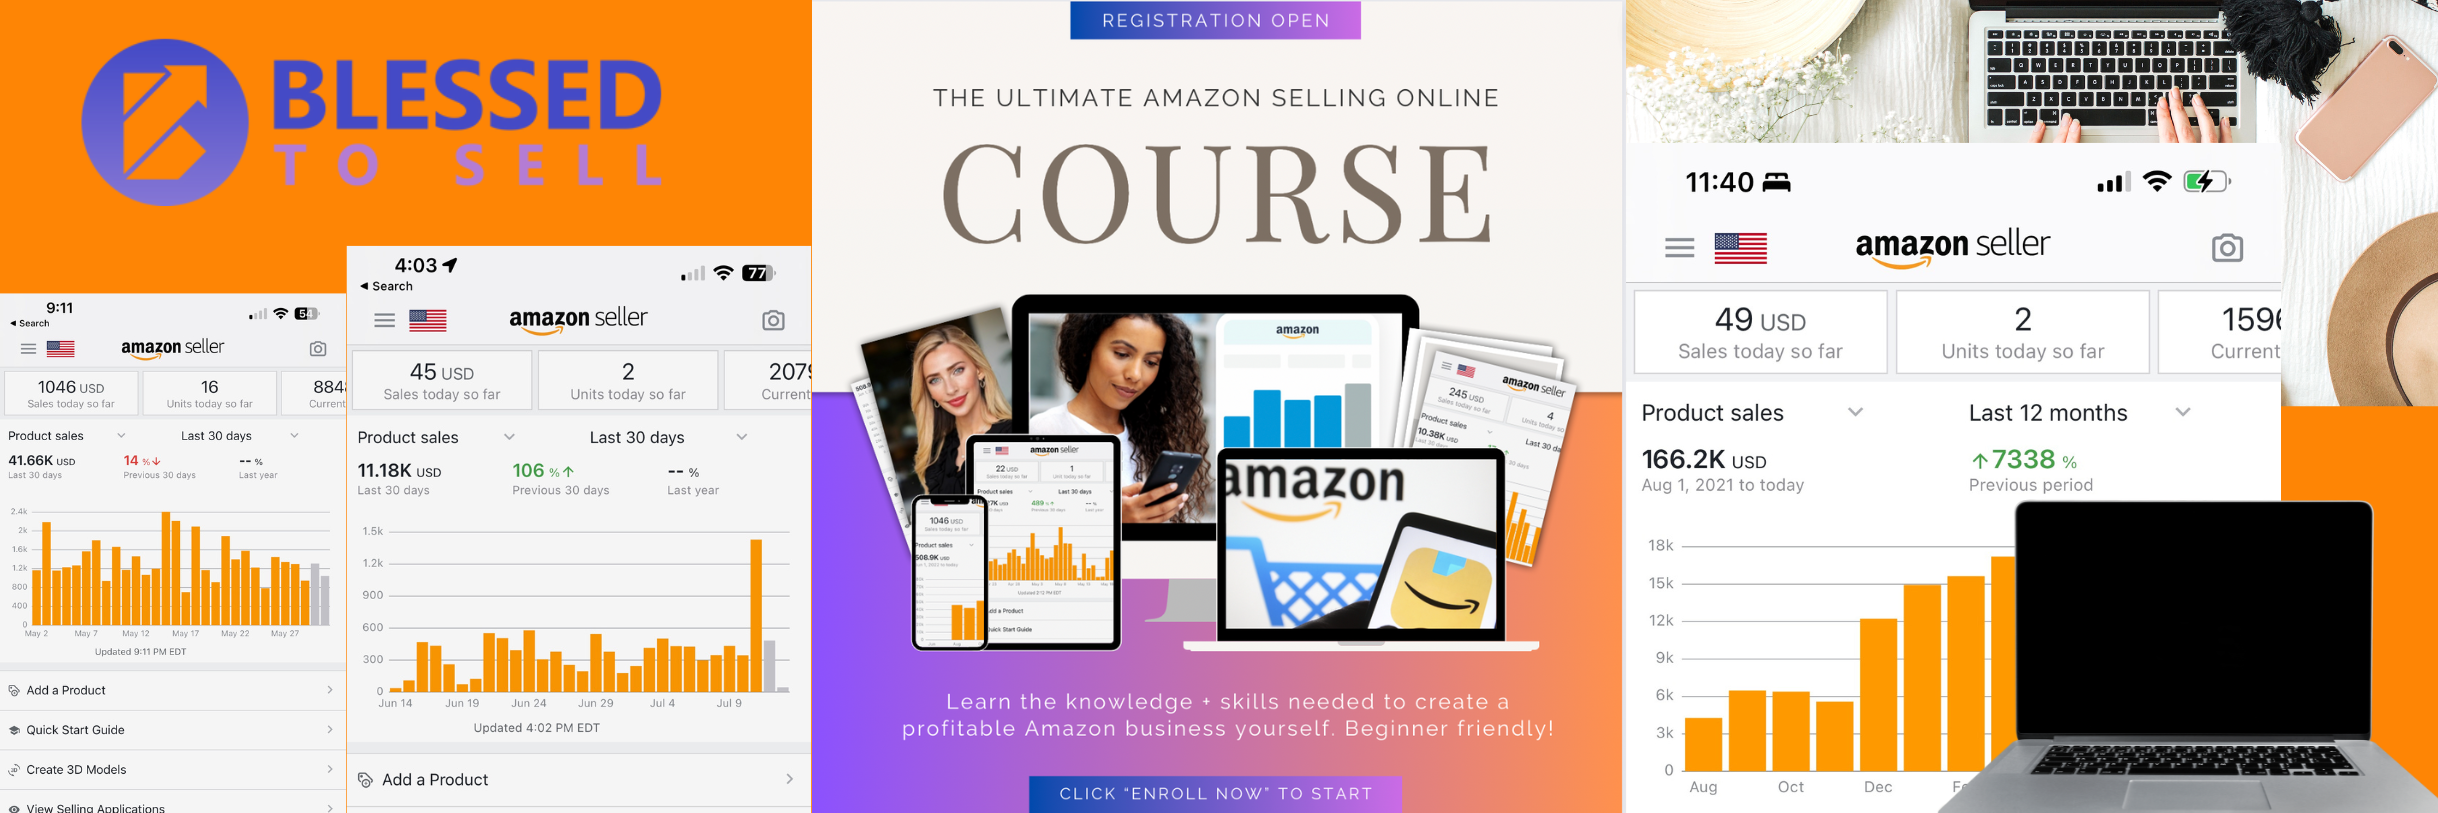 amazon seller course for beginners